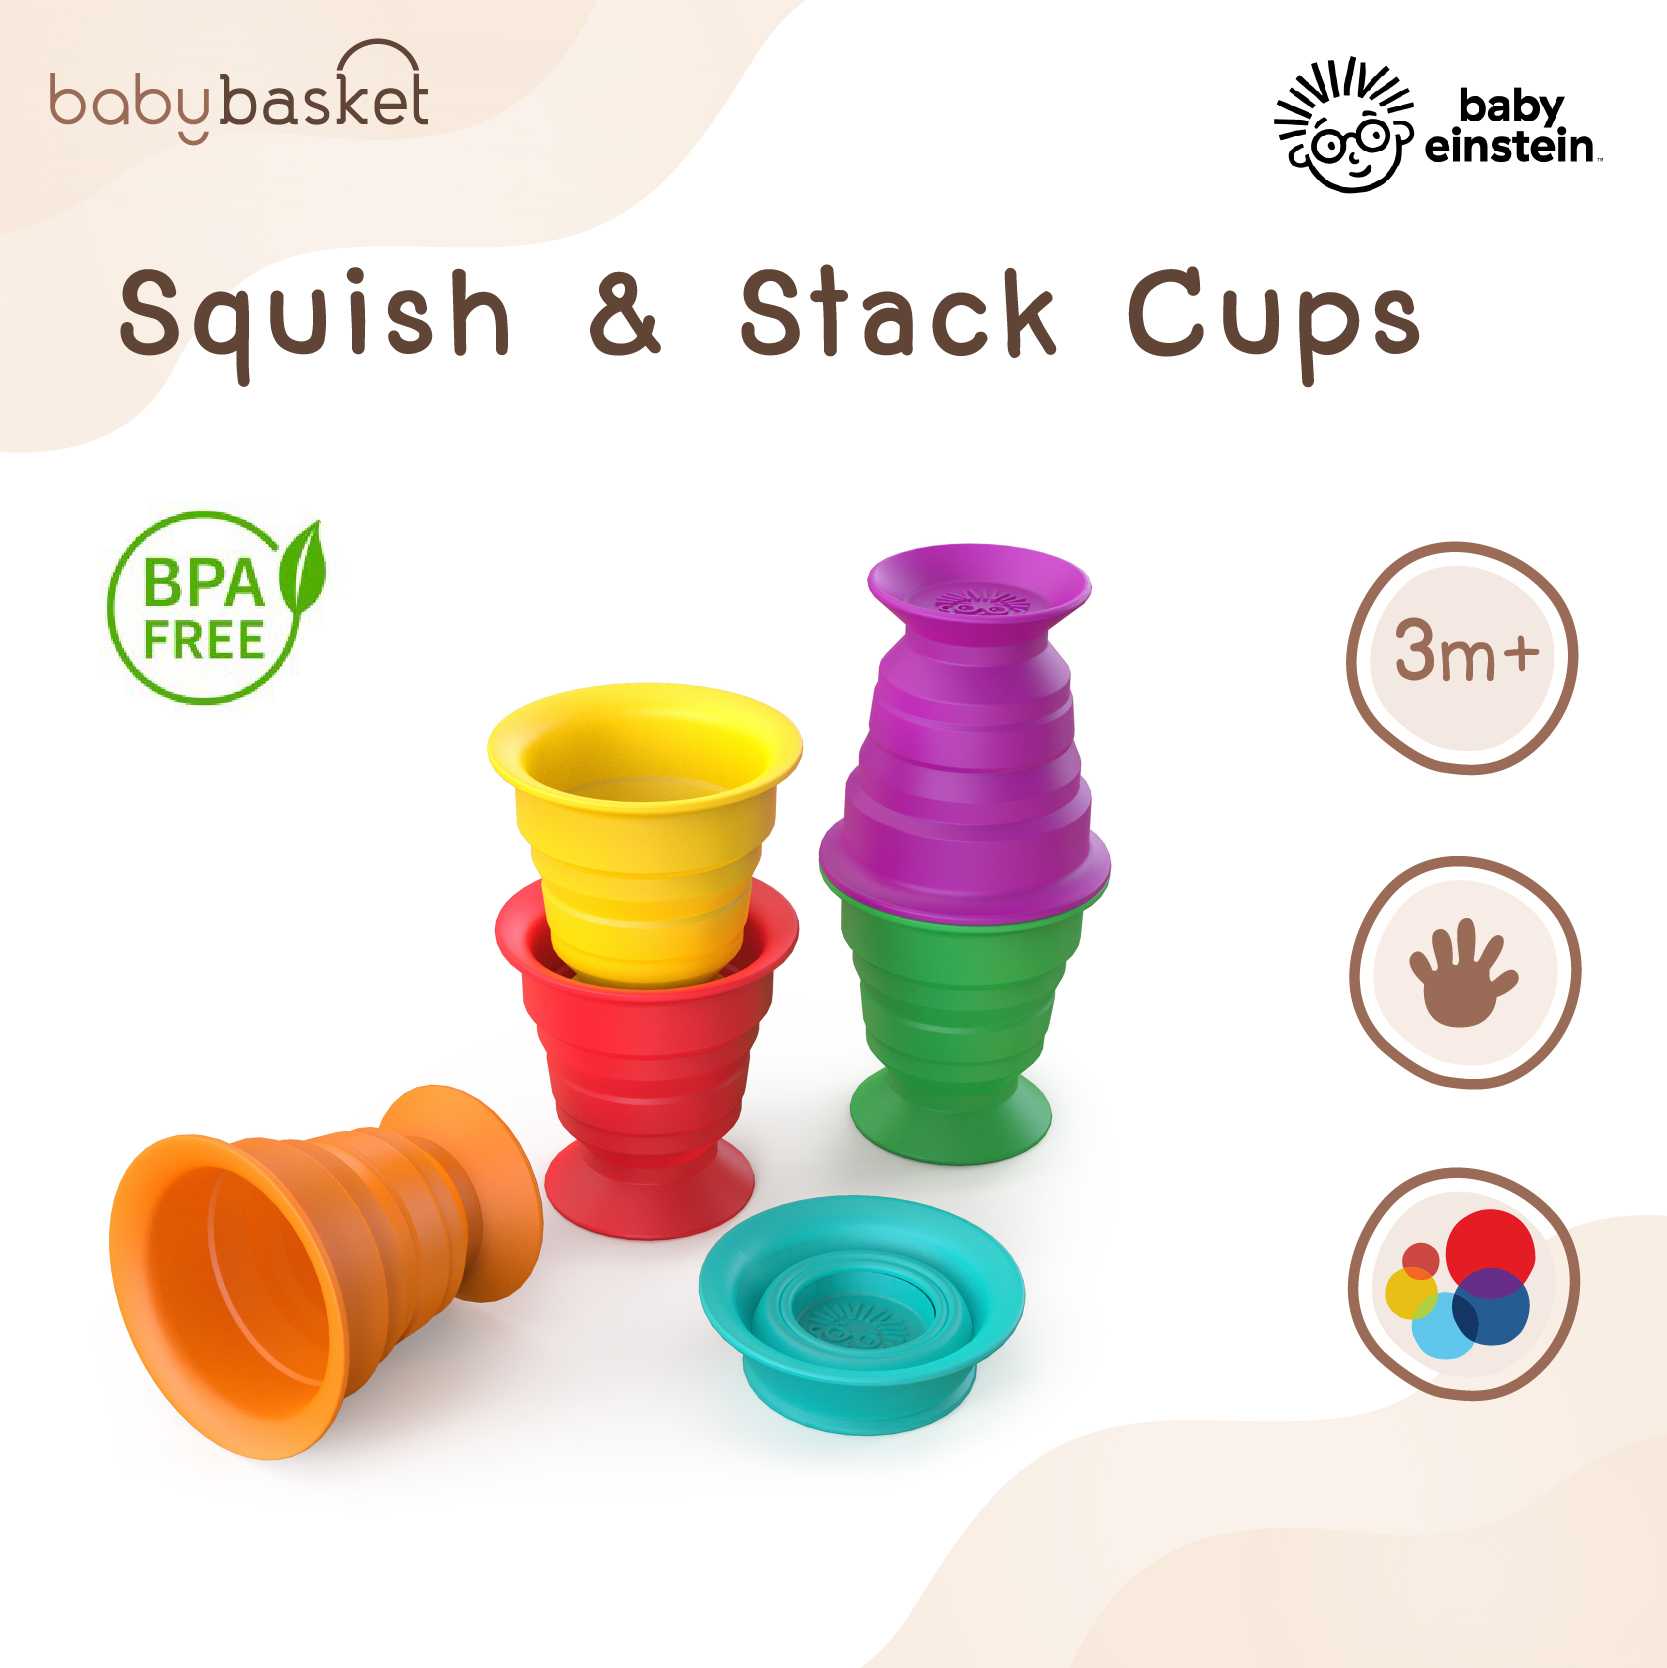 Squish & Stack Cups